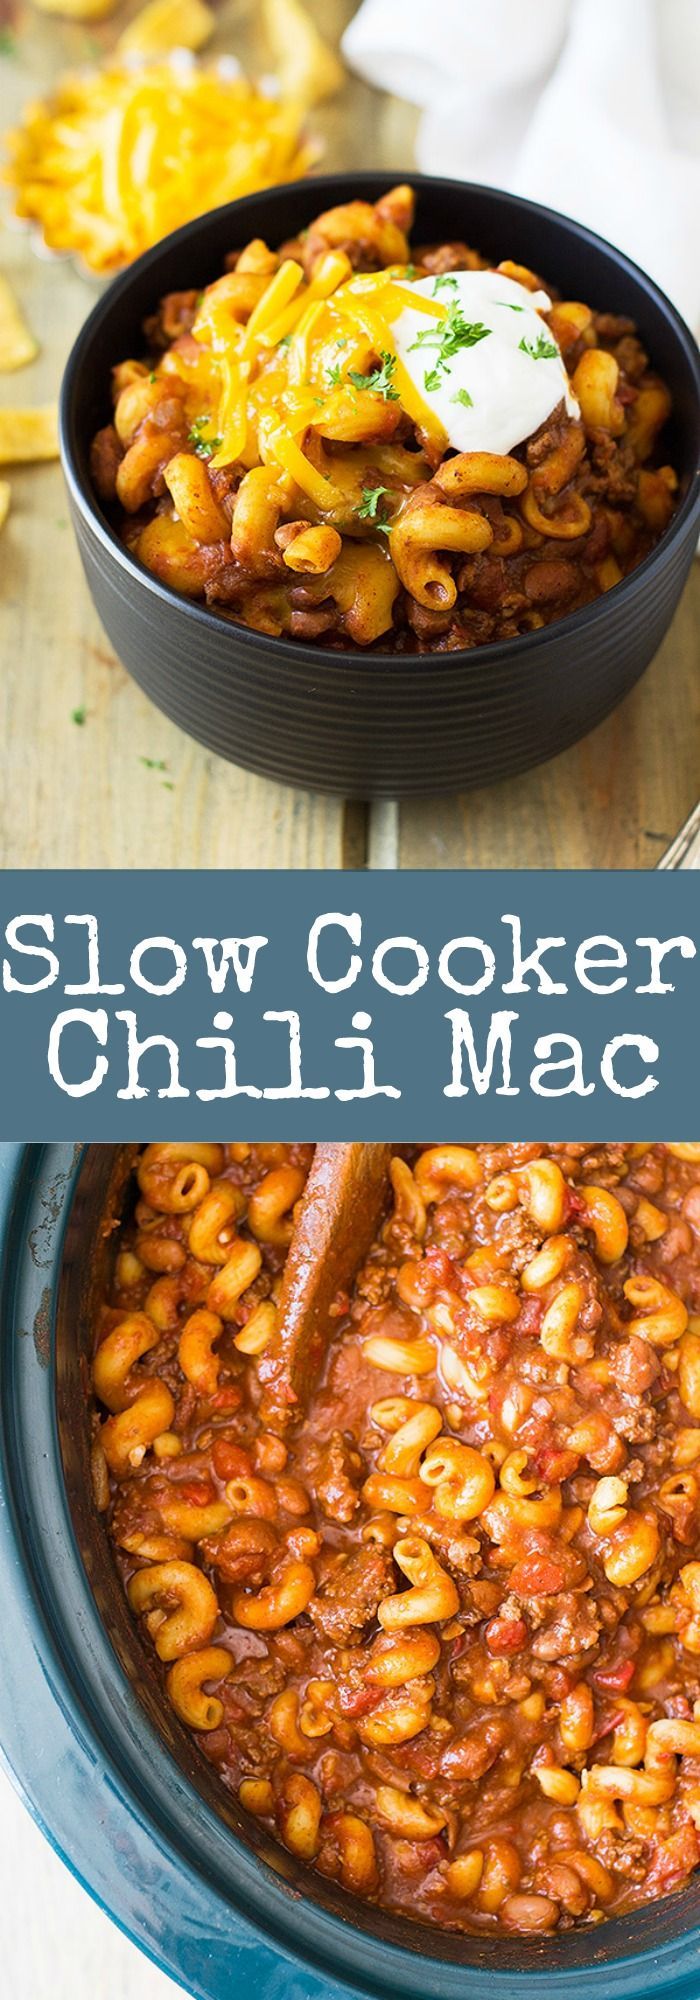 Slow Cooker Chili Mac is an easy comforting dish made right in your crock pot!! |